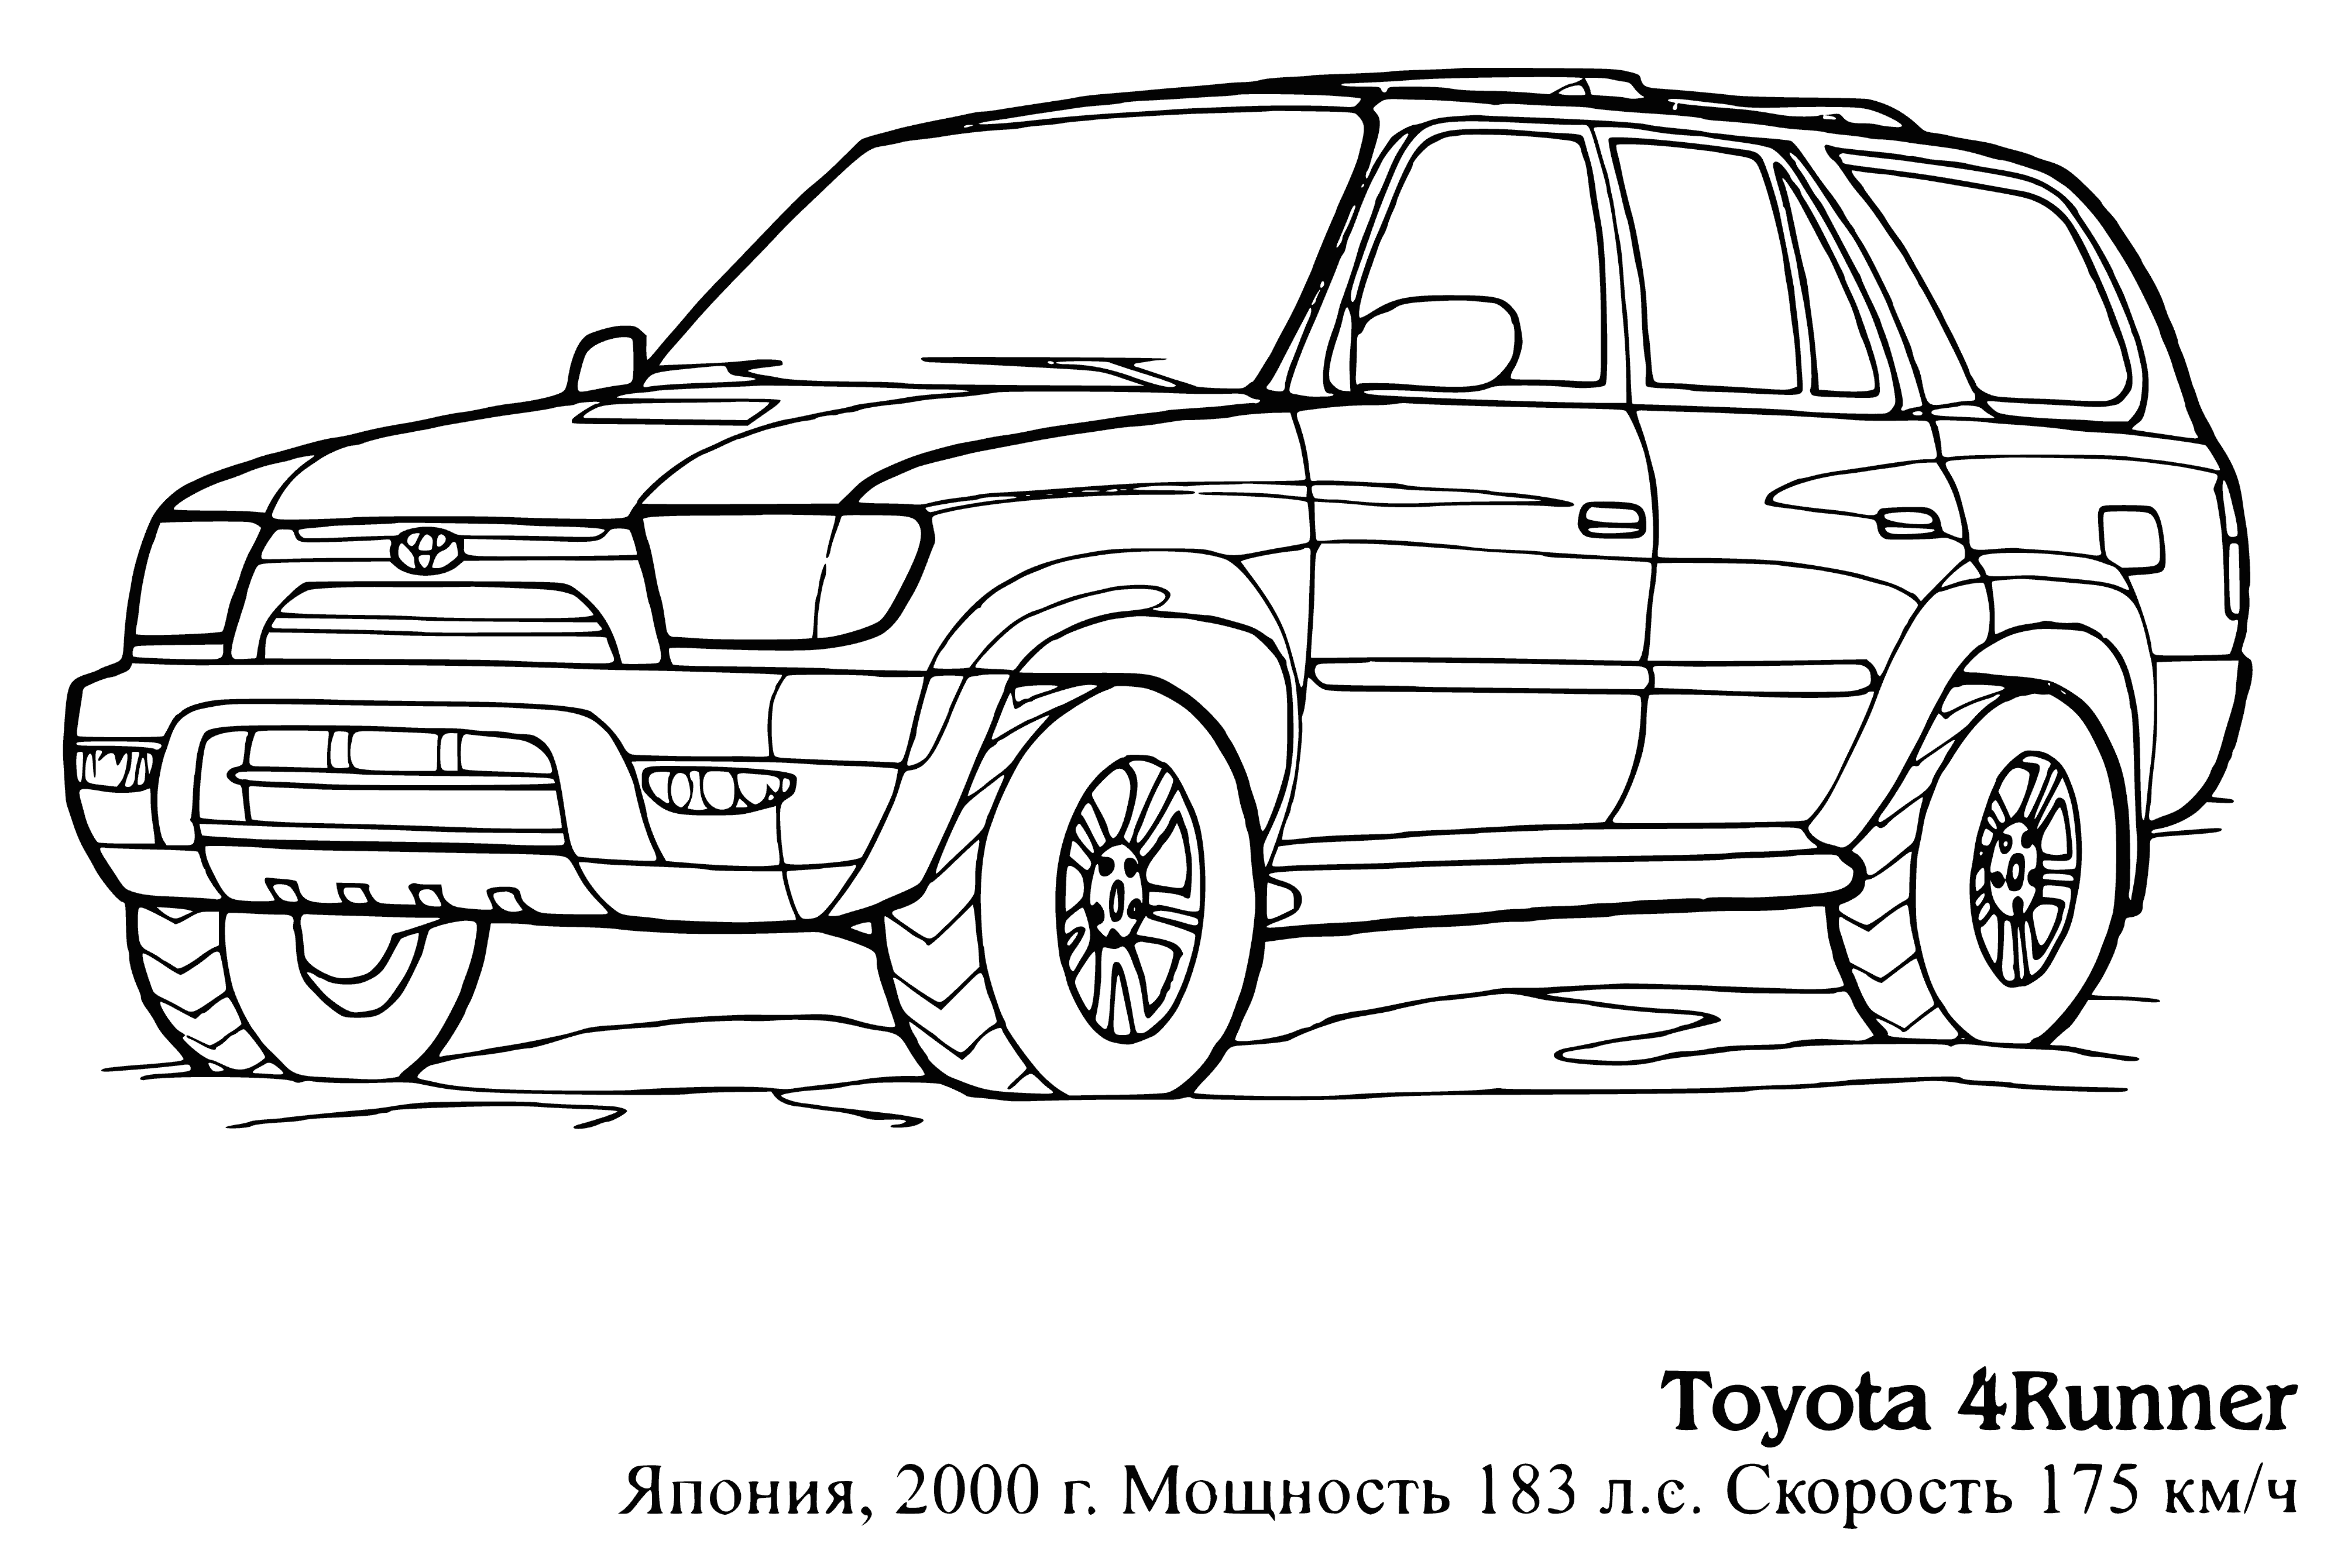 coloring page: The Toyota 4Runner is a sport utility vehicle with four doors and a V6 engine, available in RWD or 4WD.